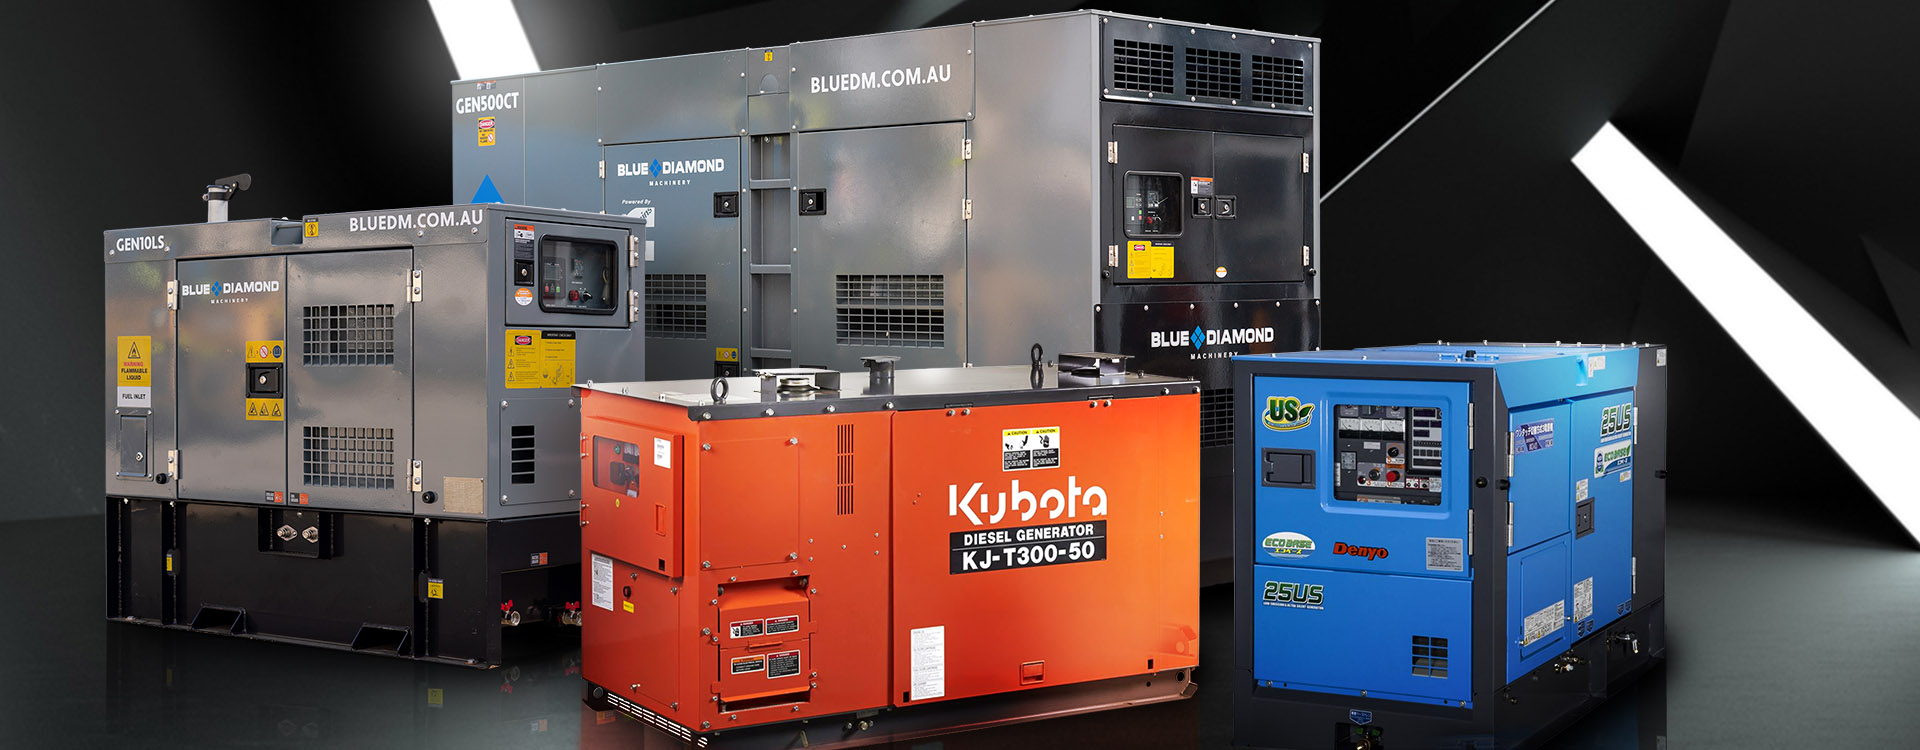 4 Generator Brands For Commercial & Industrial - Blue Diamond